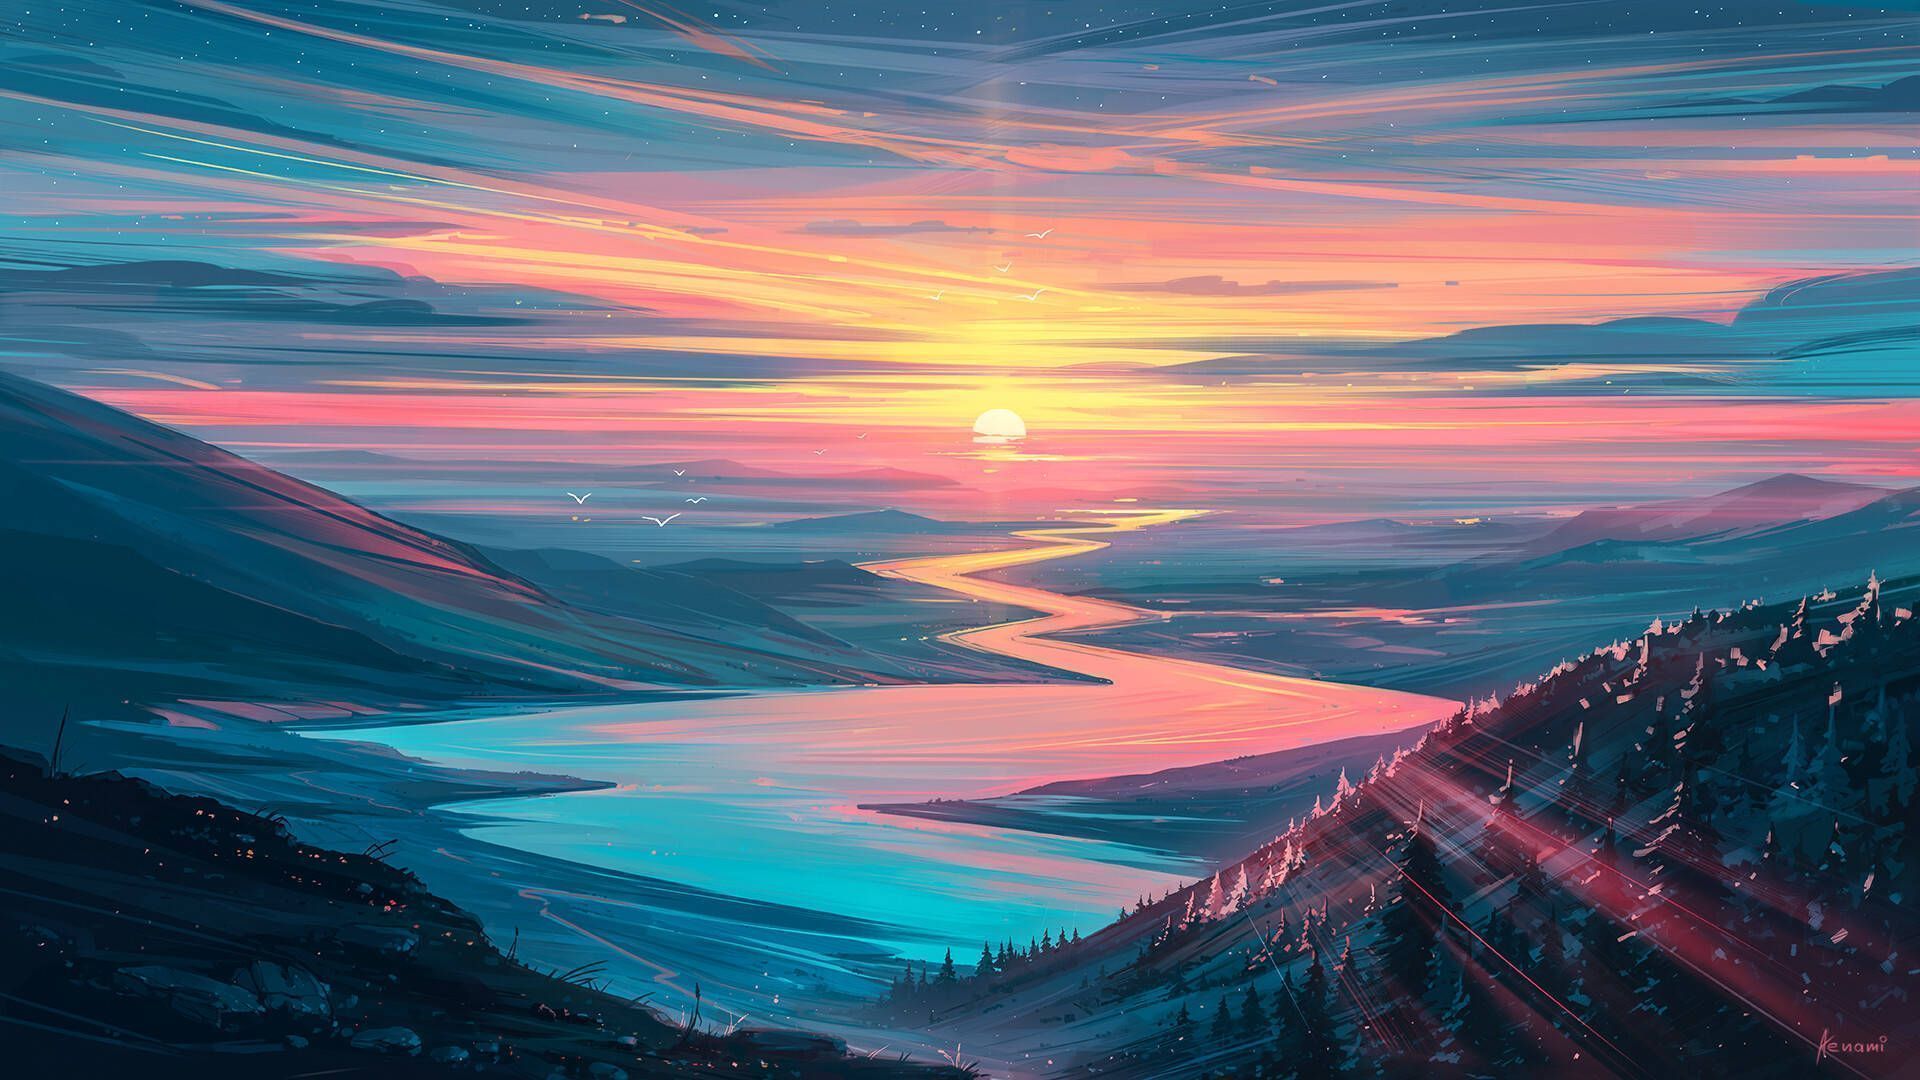 A painting of the sun setting over mountains - Landscape, scenery, river